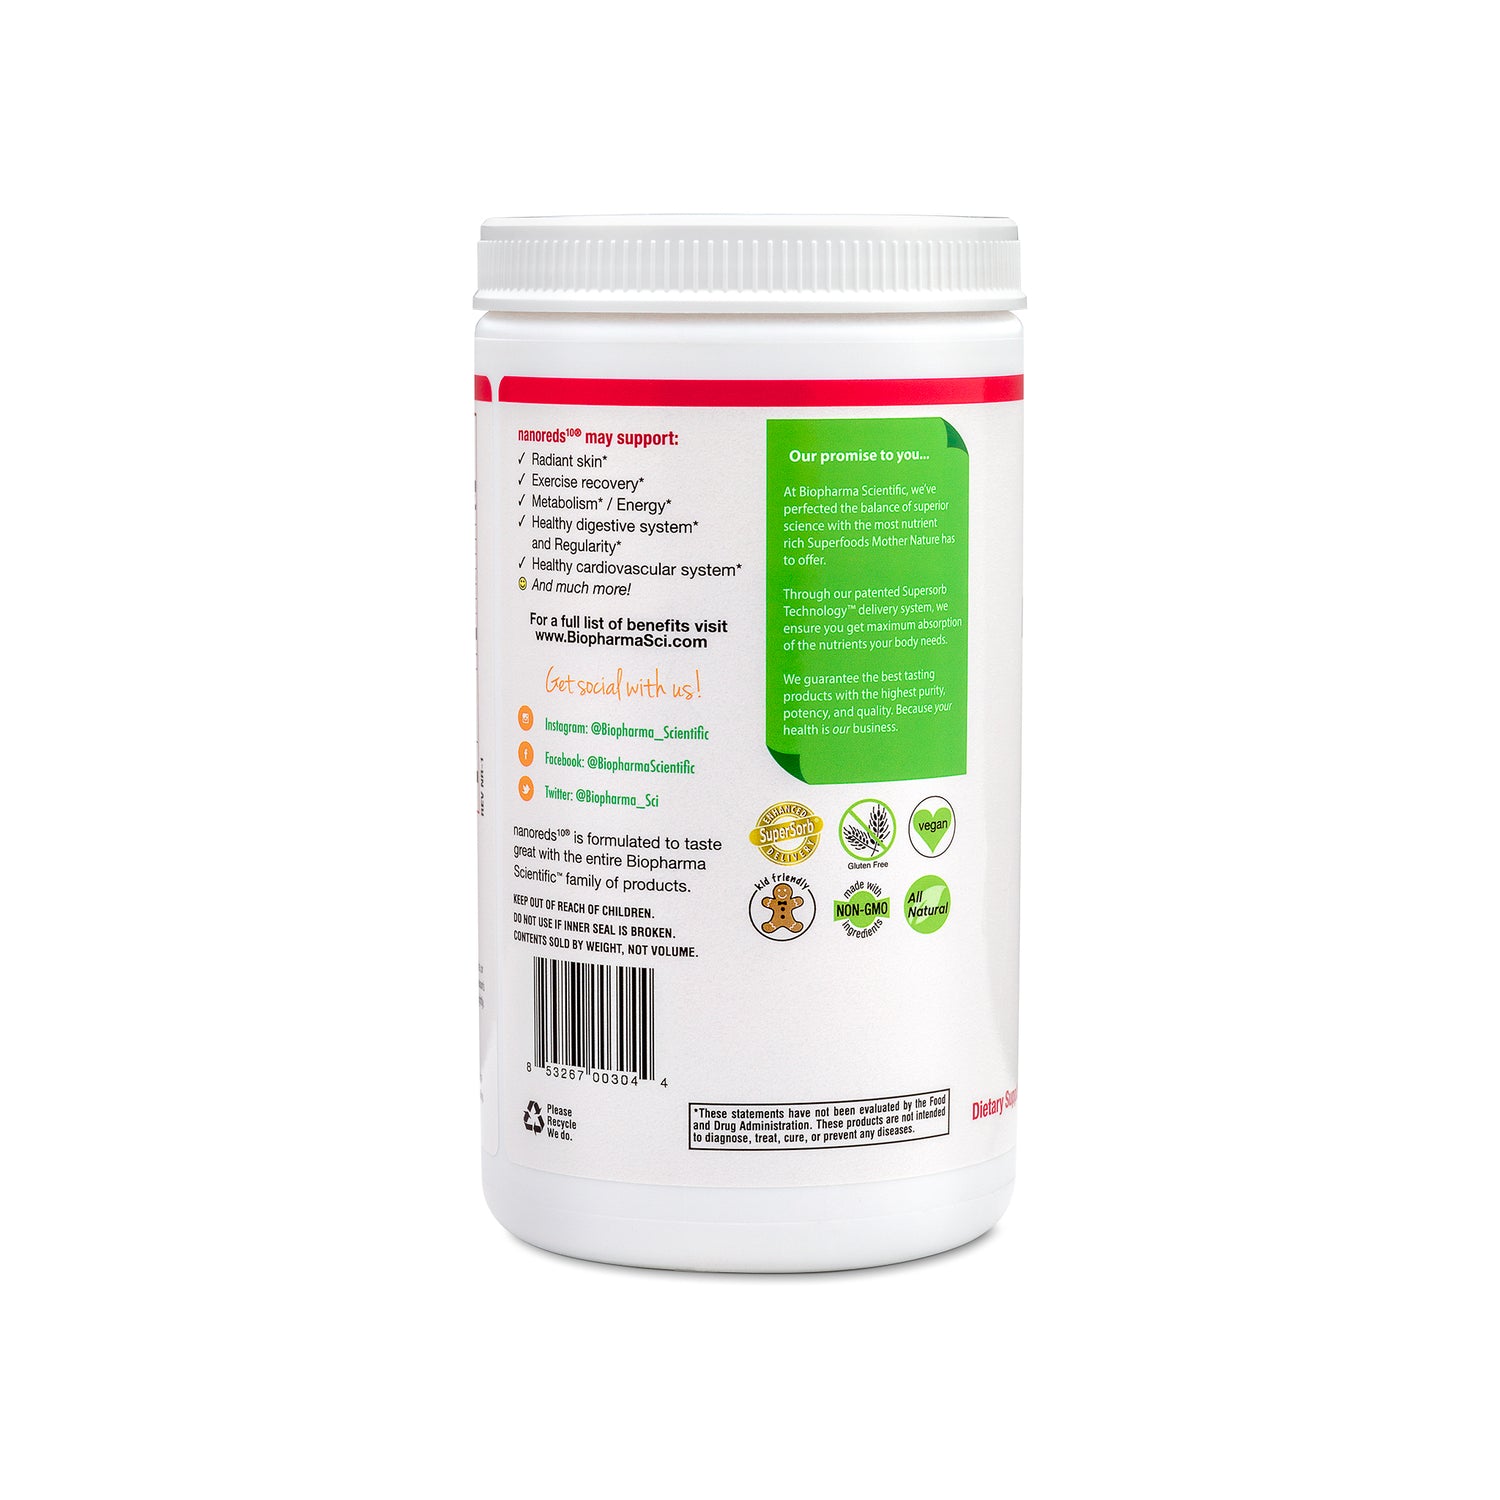 nanored natural reds fruit and vegetable superfood with resveratrol - side with additional facts